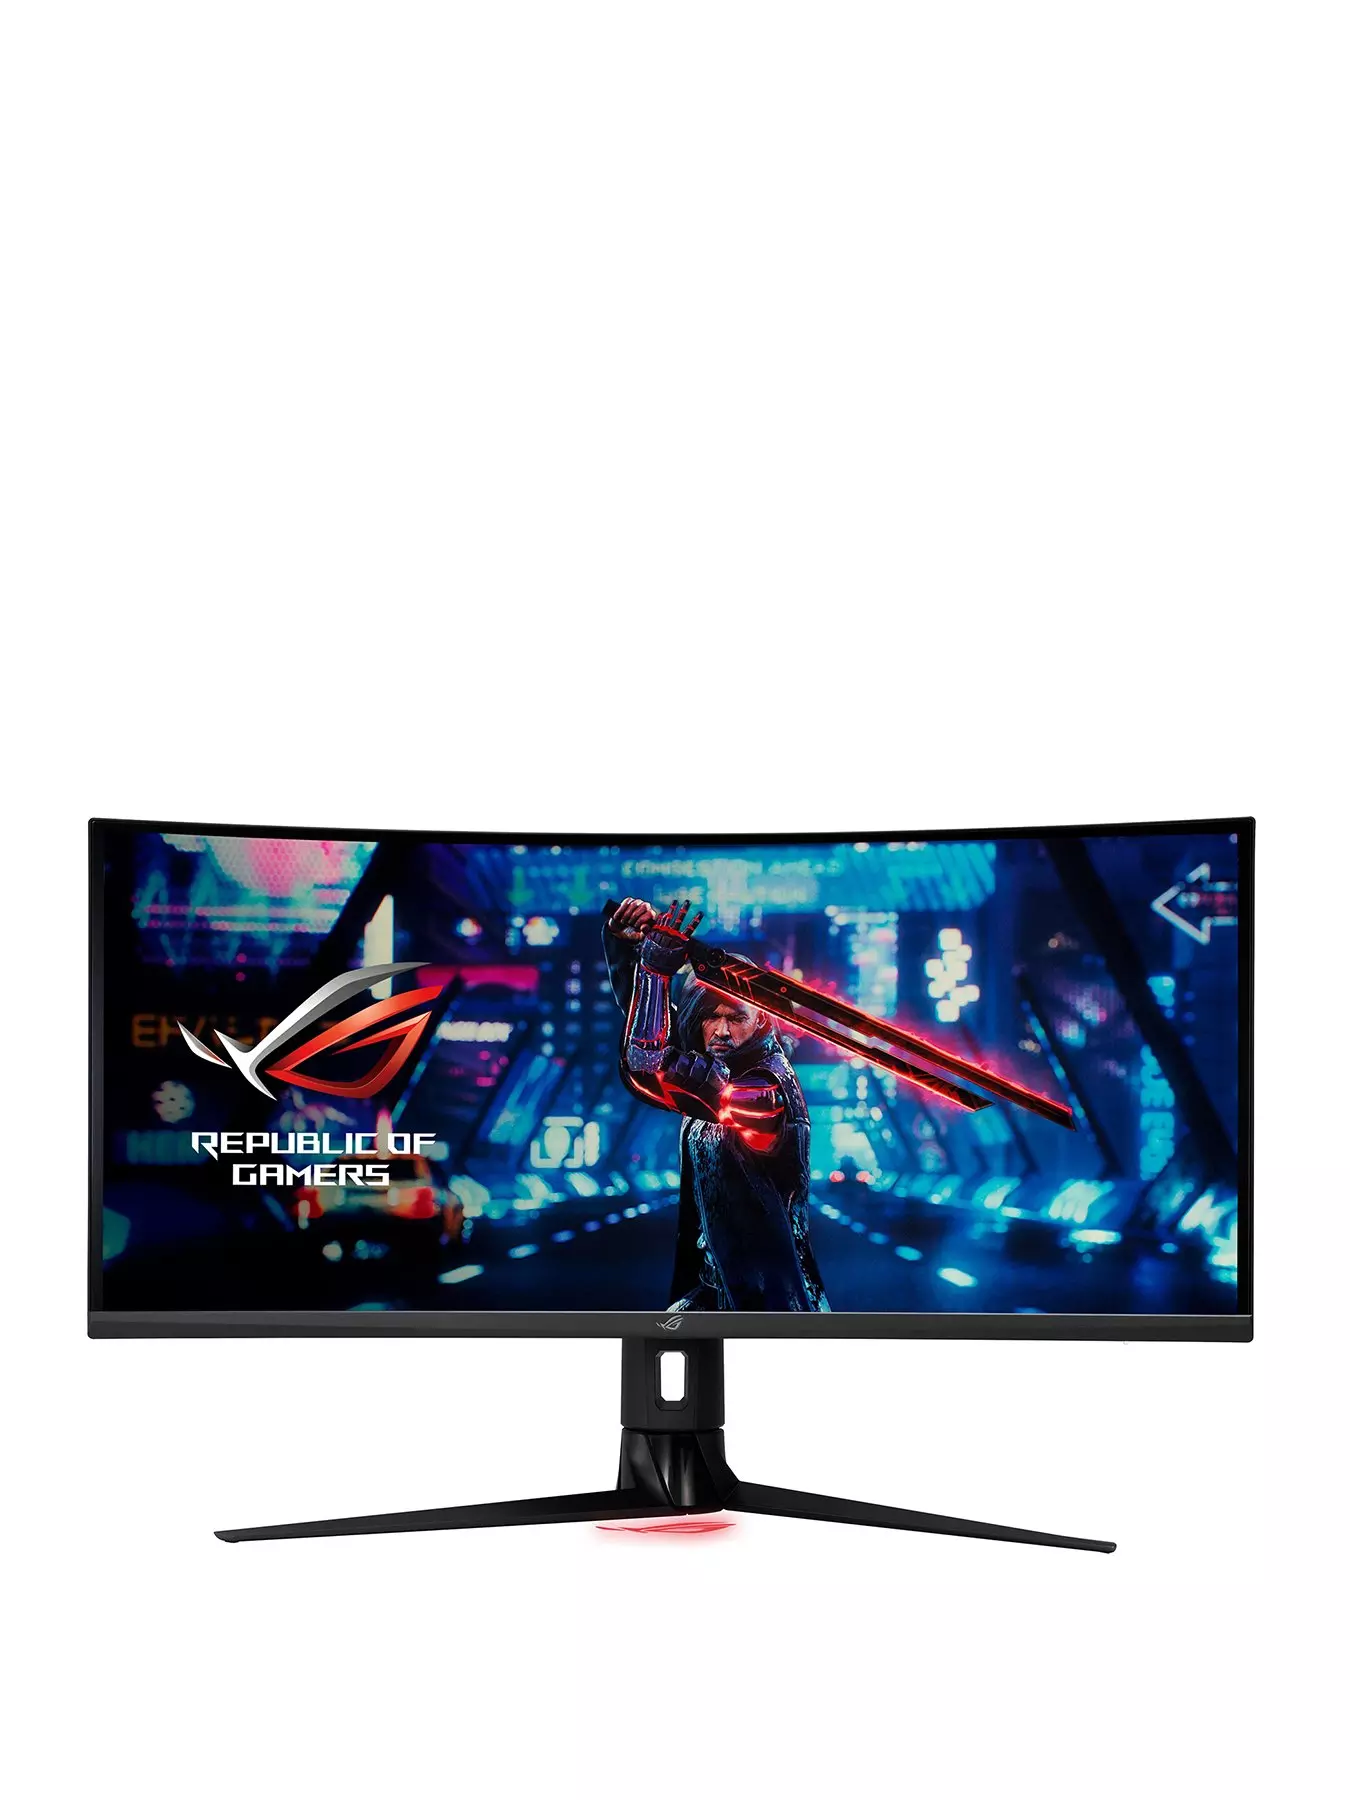 This 360Hz Asus ROG gaming monitor used to be $799. Now it's $299